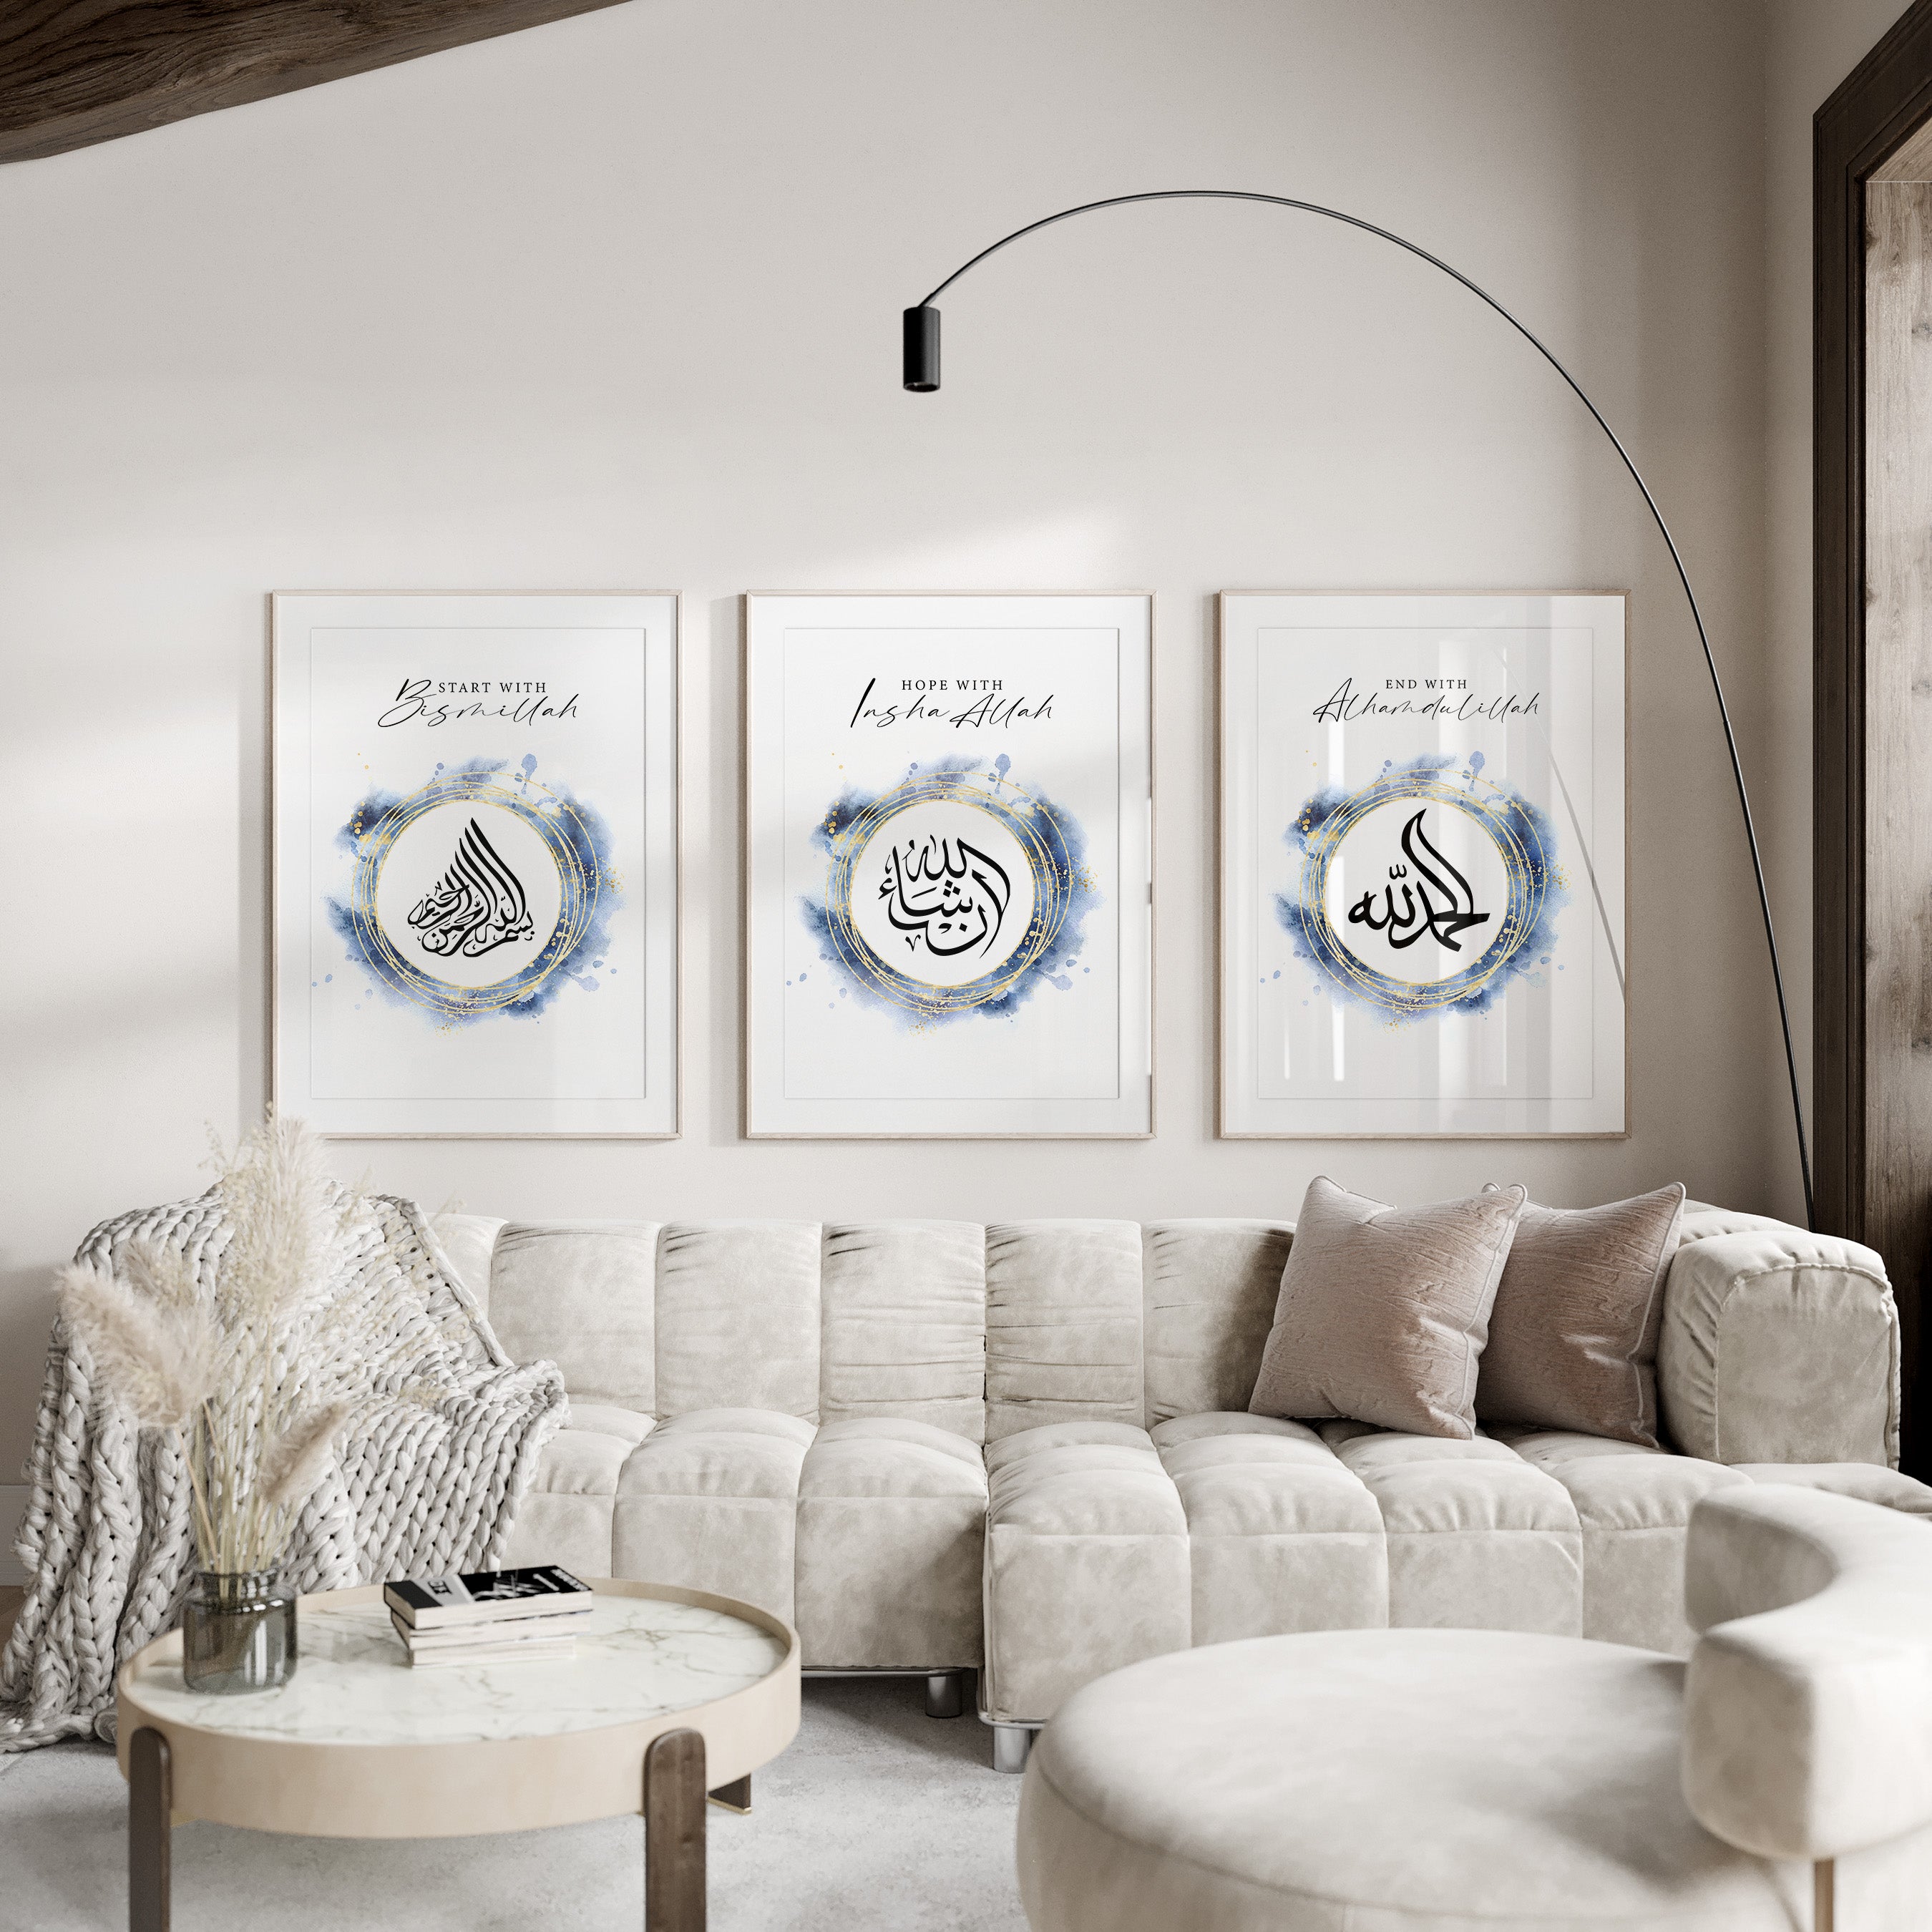 Set of 3 Start with Bismillah | Hope with InshaAllah | End with Alhamdulillah | Islamic Wall art | Decor - Peaceful Arts ltd